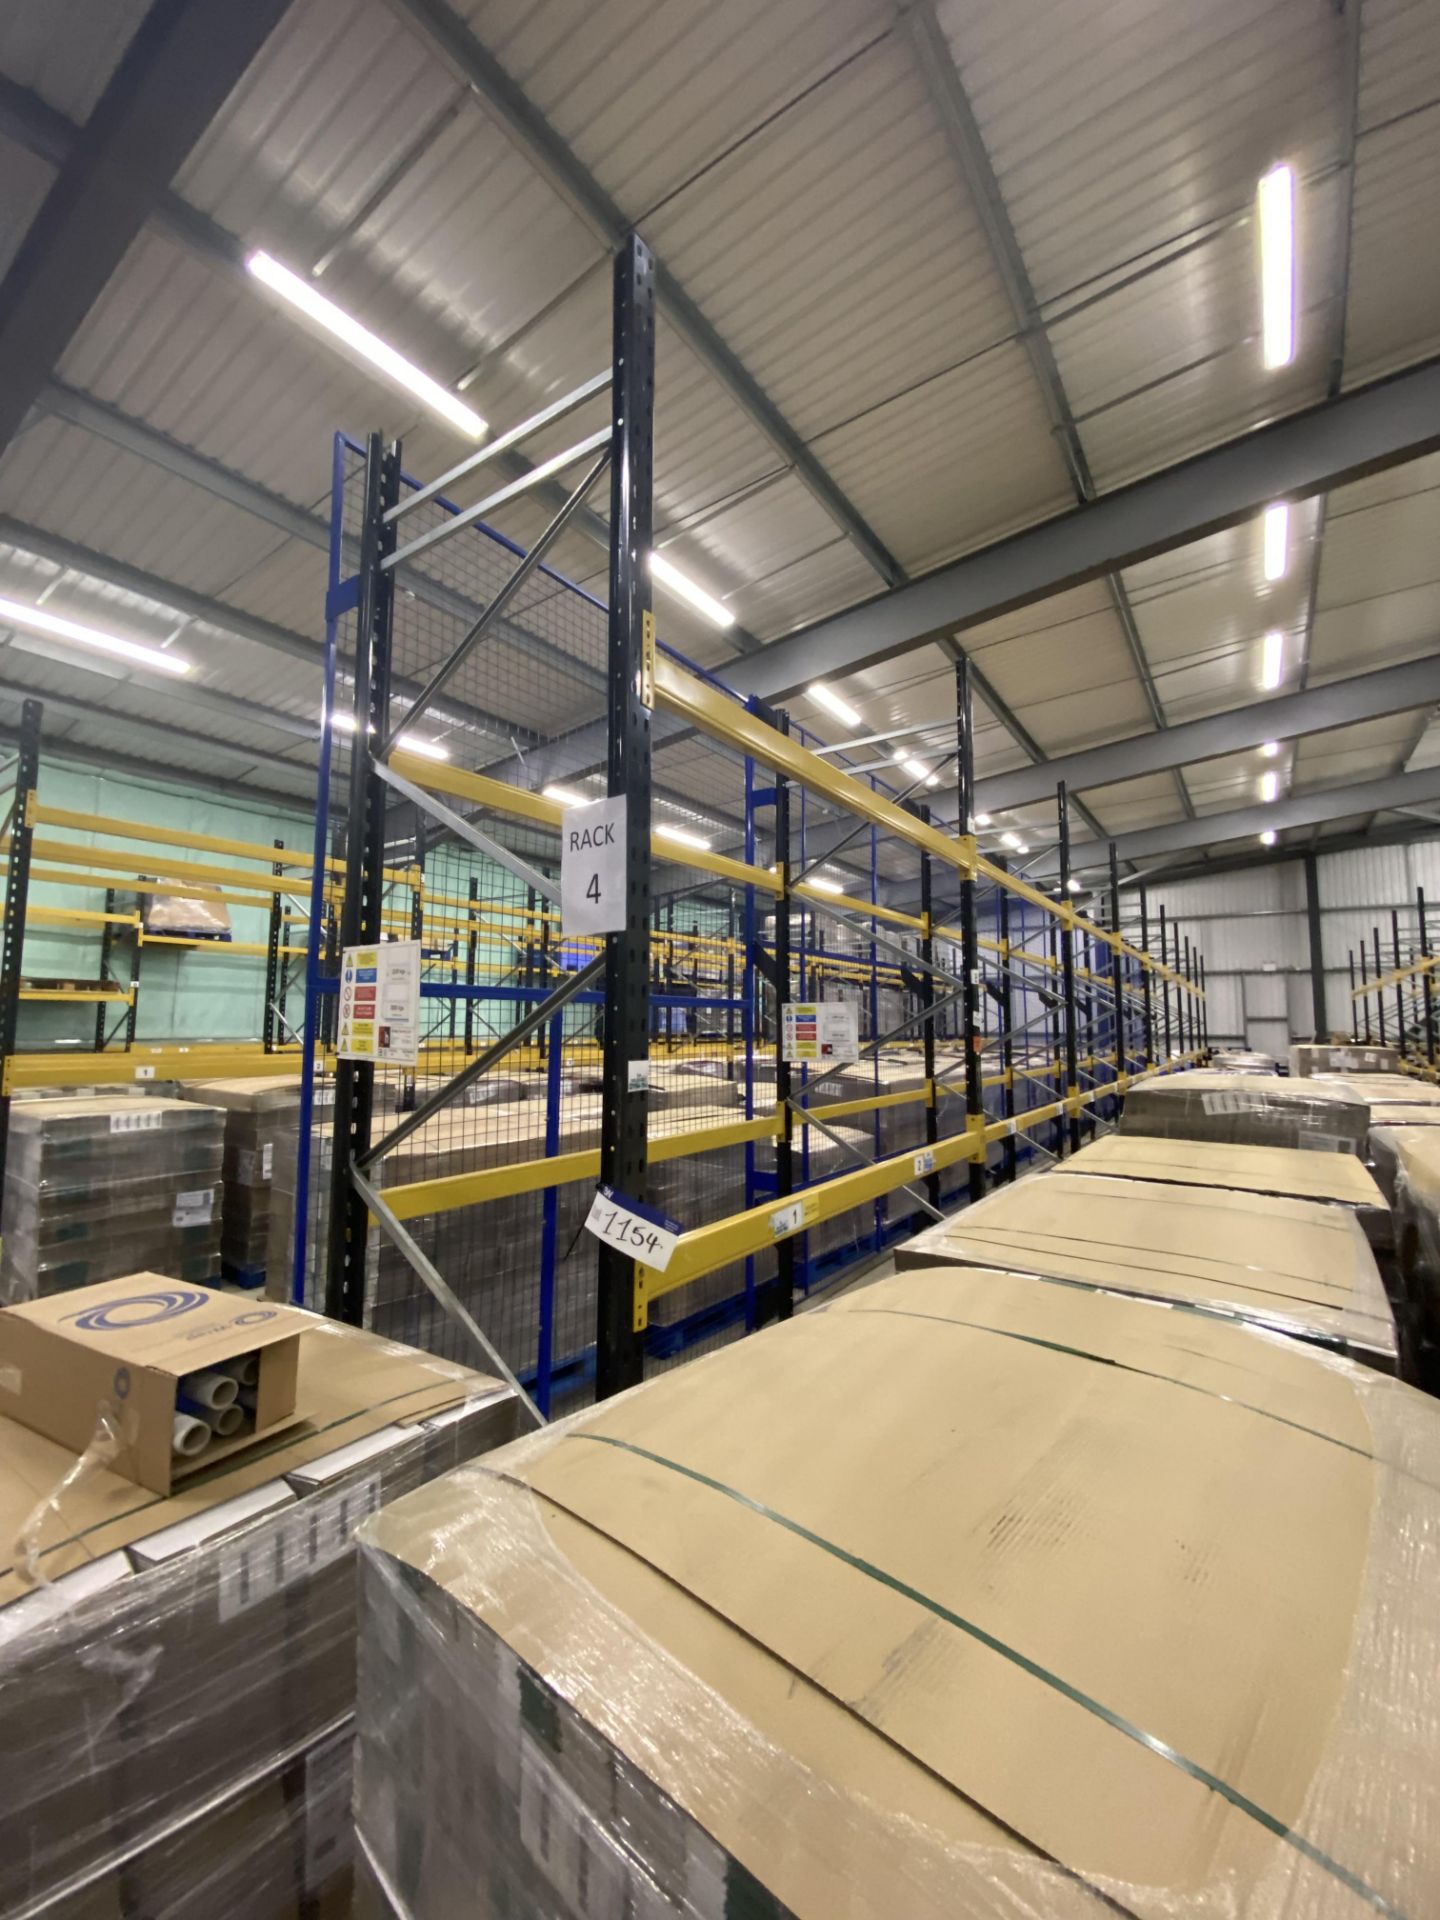 Link51 Nine Bay Mainly Two Tier Boltless Pallet Racking, each bay approx. 2.6m x 1.1m x 3.6m high,